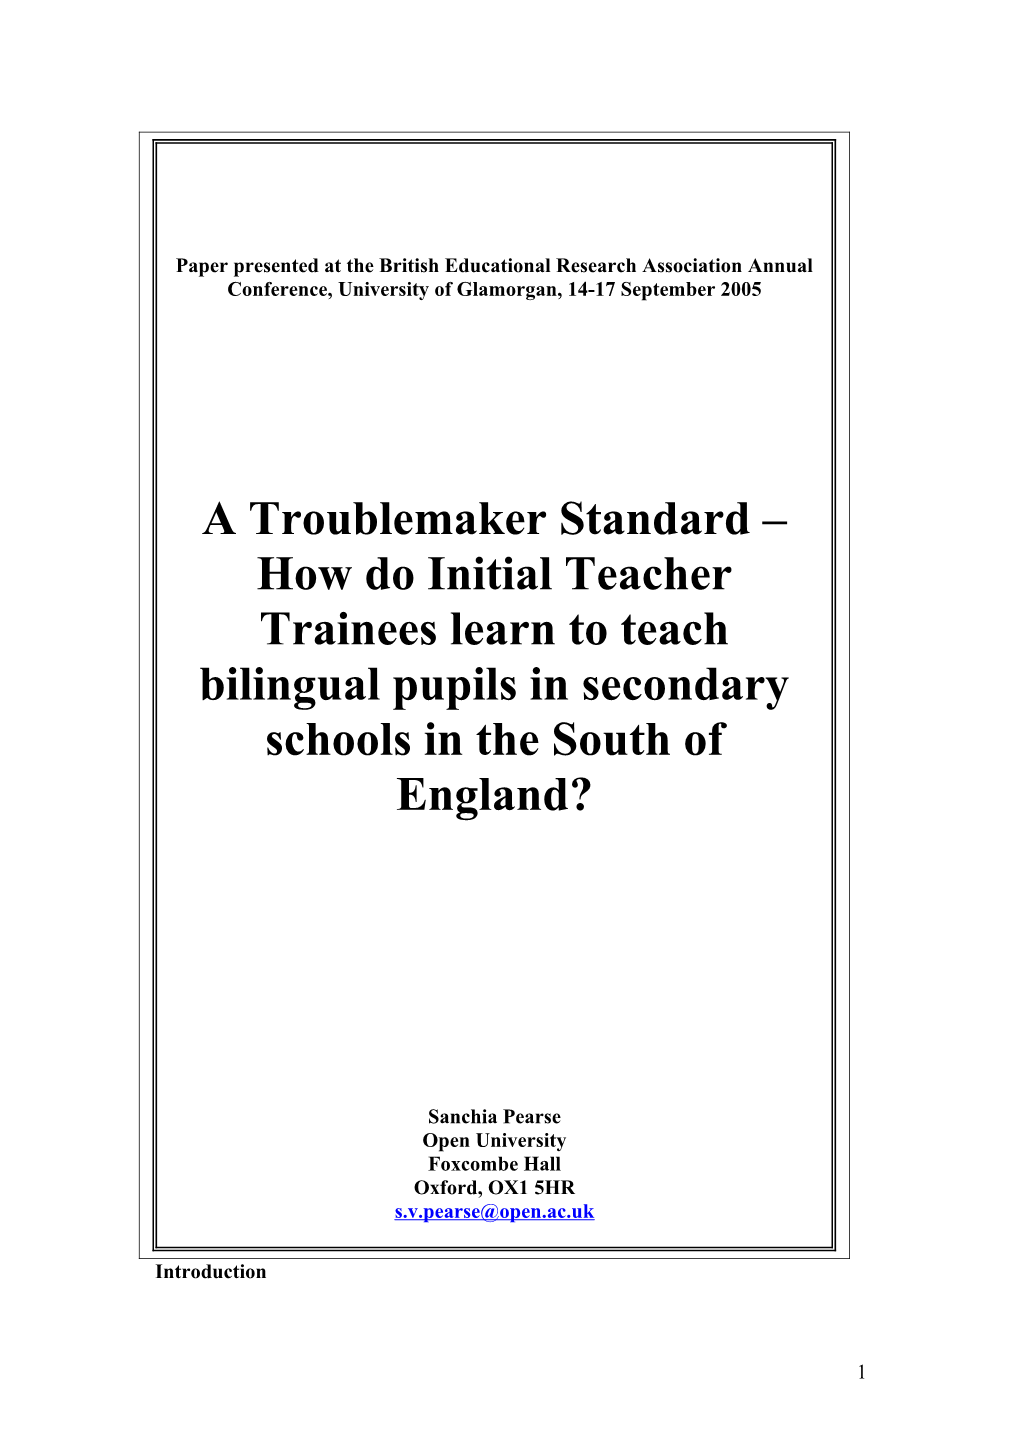 Since 2002, Initial Teacher Trainees in England Have Been Required by the Government To